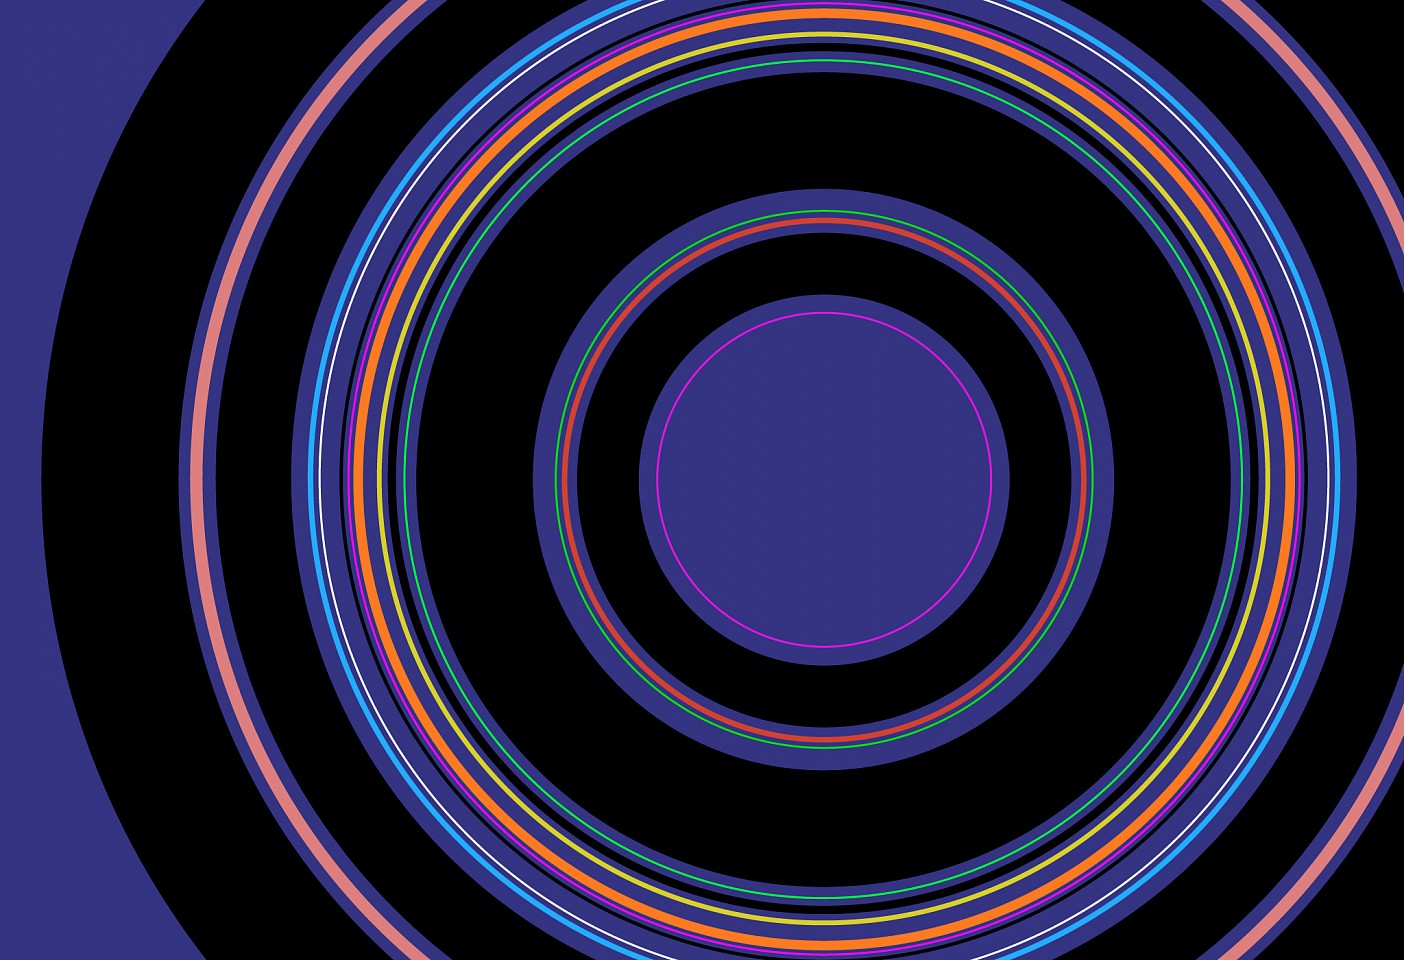 Dane Albert, Circles #43 Night (black), 2023
Acrylic on canvas (Concept), 48 x 72 in. (121.9 x 182.9 cm)
Series of colored lines and shapes in multiple configurations
DA.2023-043-night-black